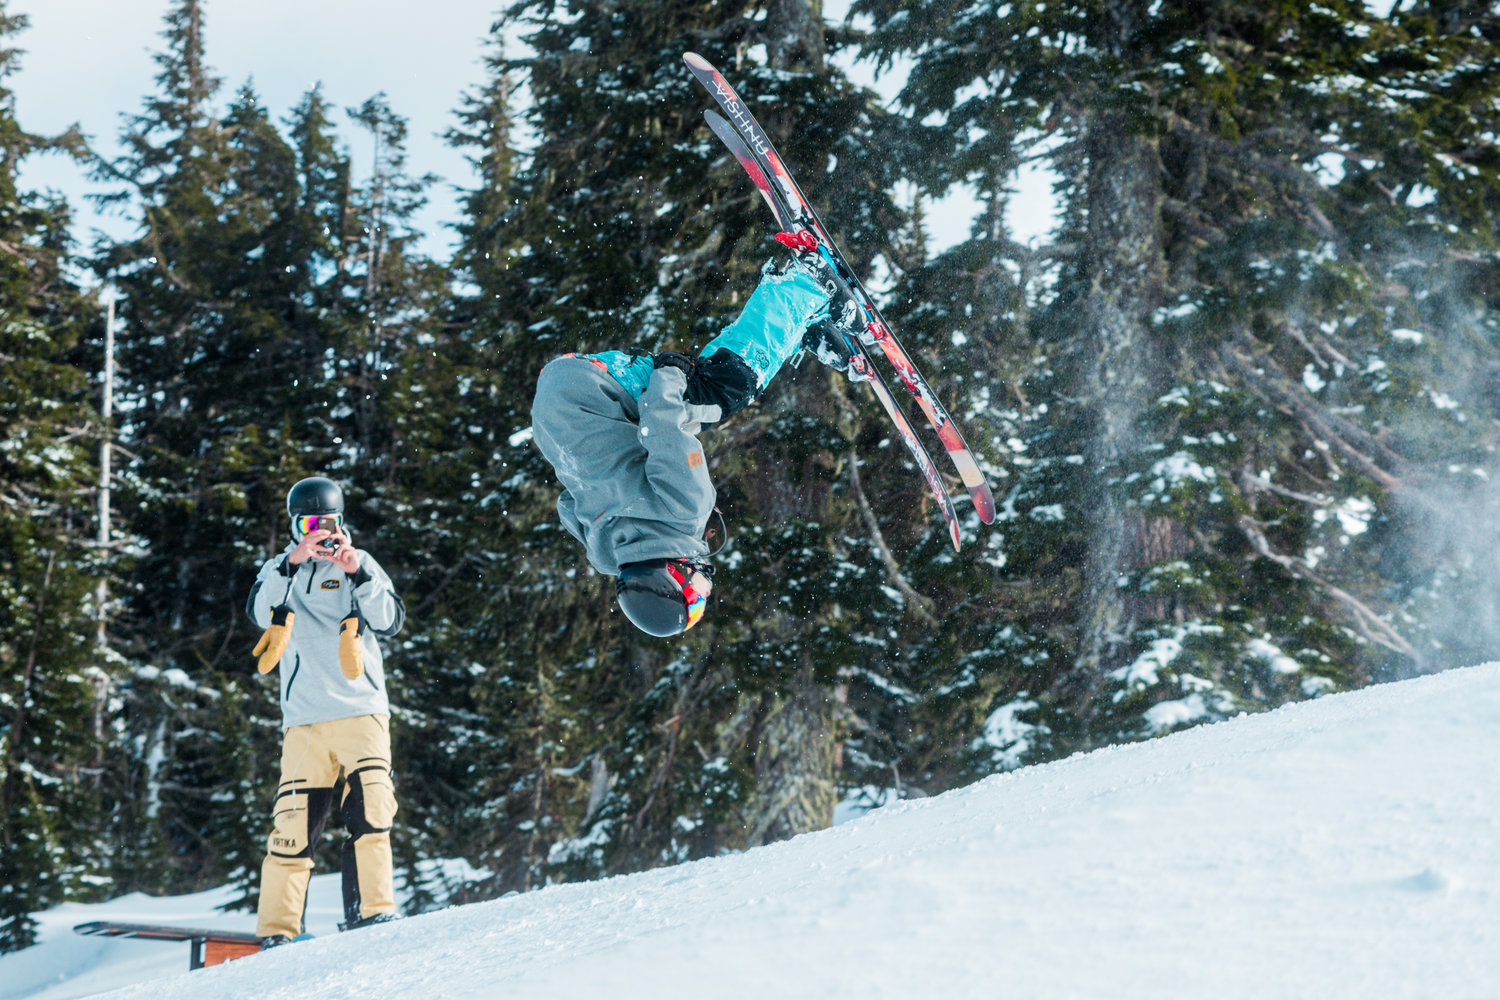 Friends film as a flip is attempted at the Ribeye jump park inside the White Pass Ski Area on Sunday.